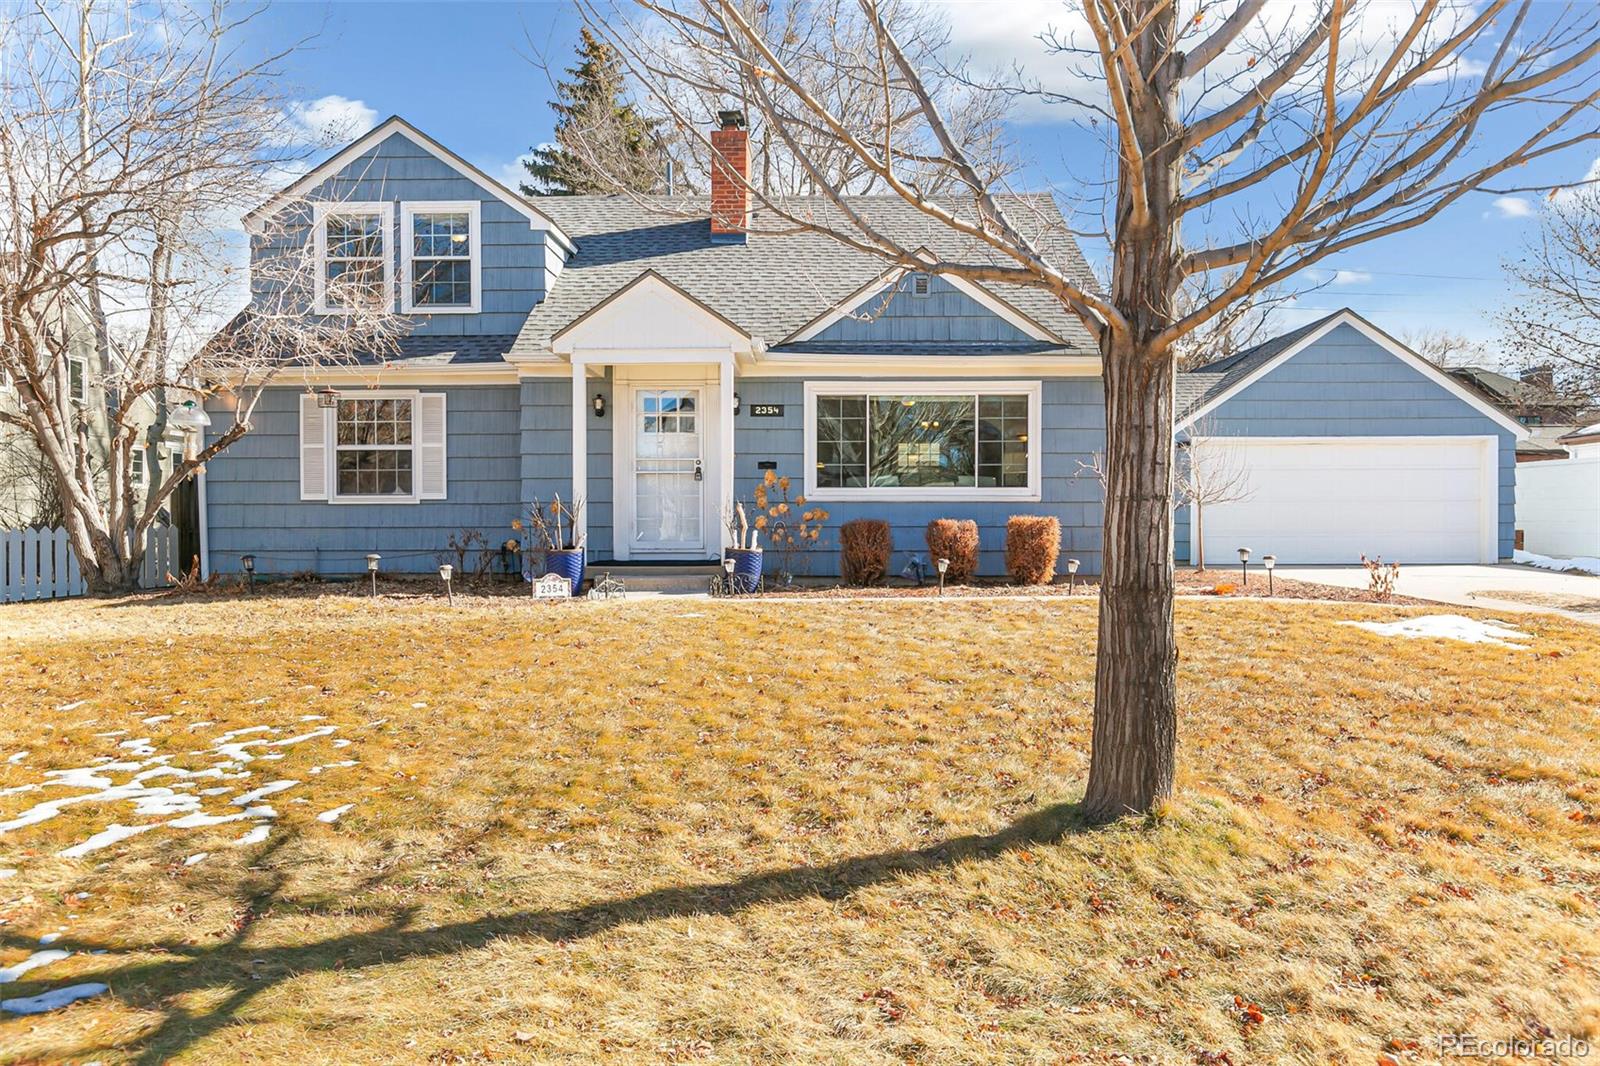 2354 s madison street, denver sold home. Closed on 2024-05-08 for $1,630,000.